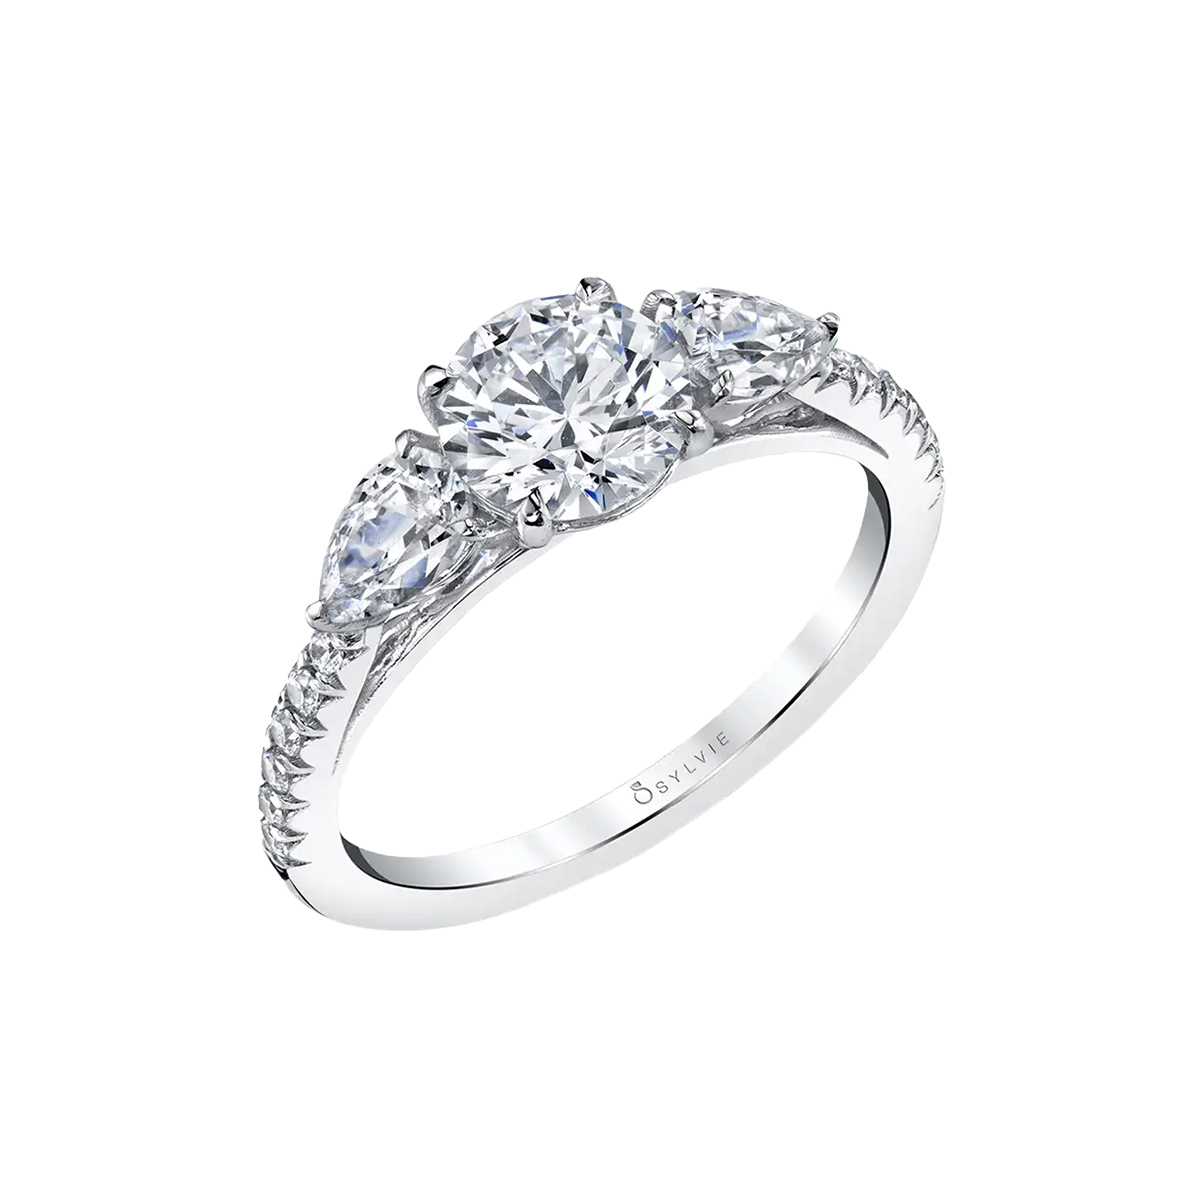 14K White Gold Round Cut Three Stone Engagement Ring with Pear Shaped Side Stones - Vanna